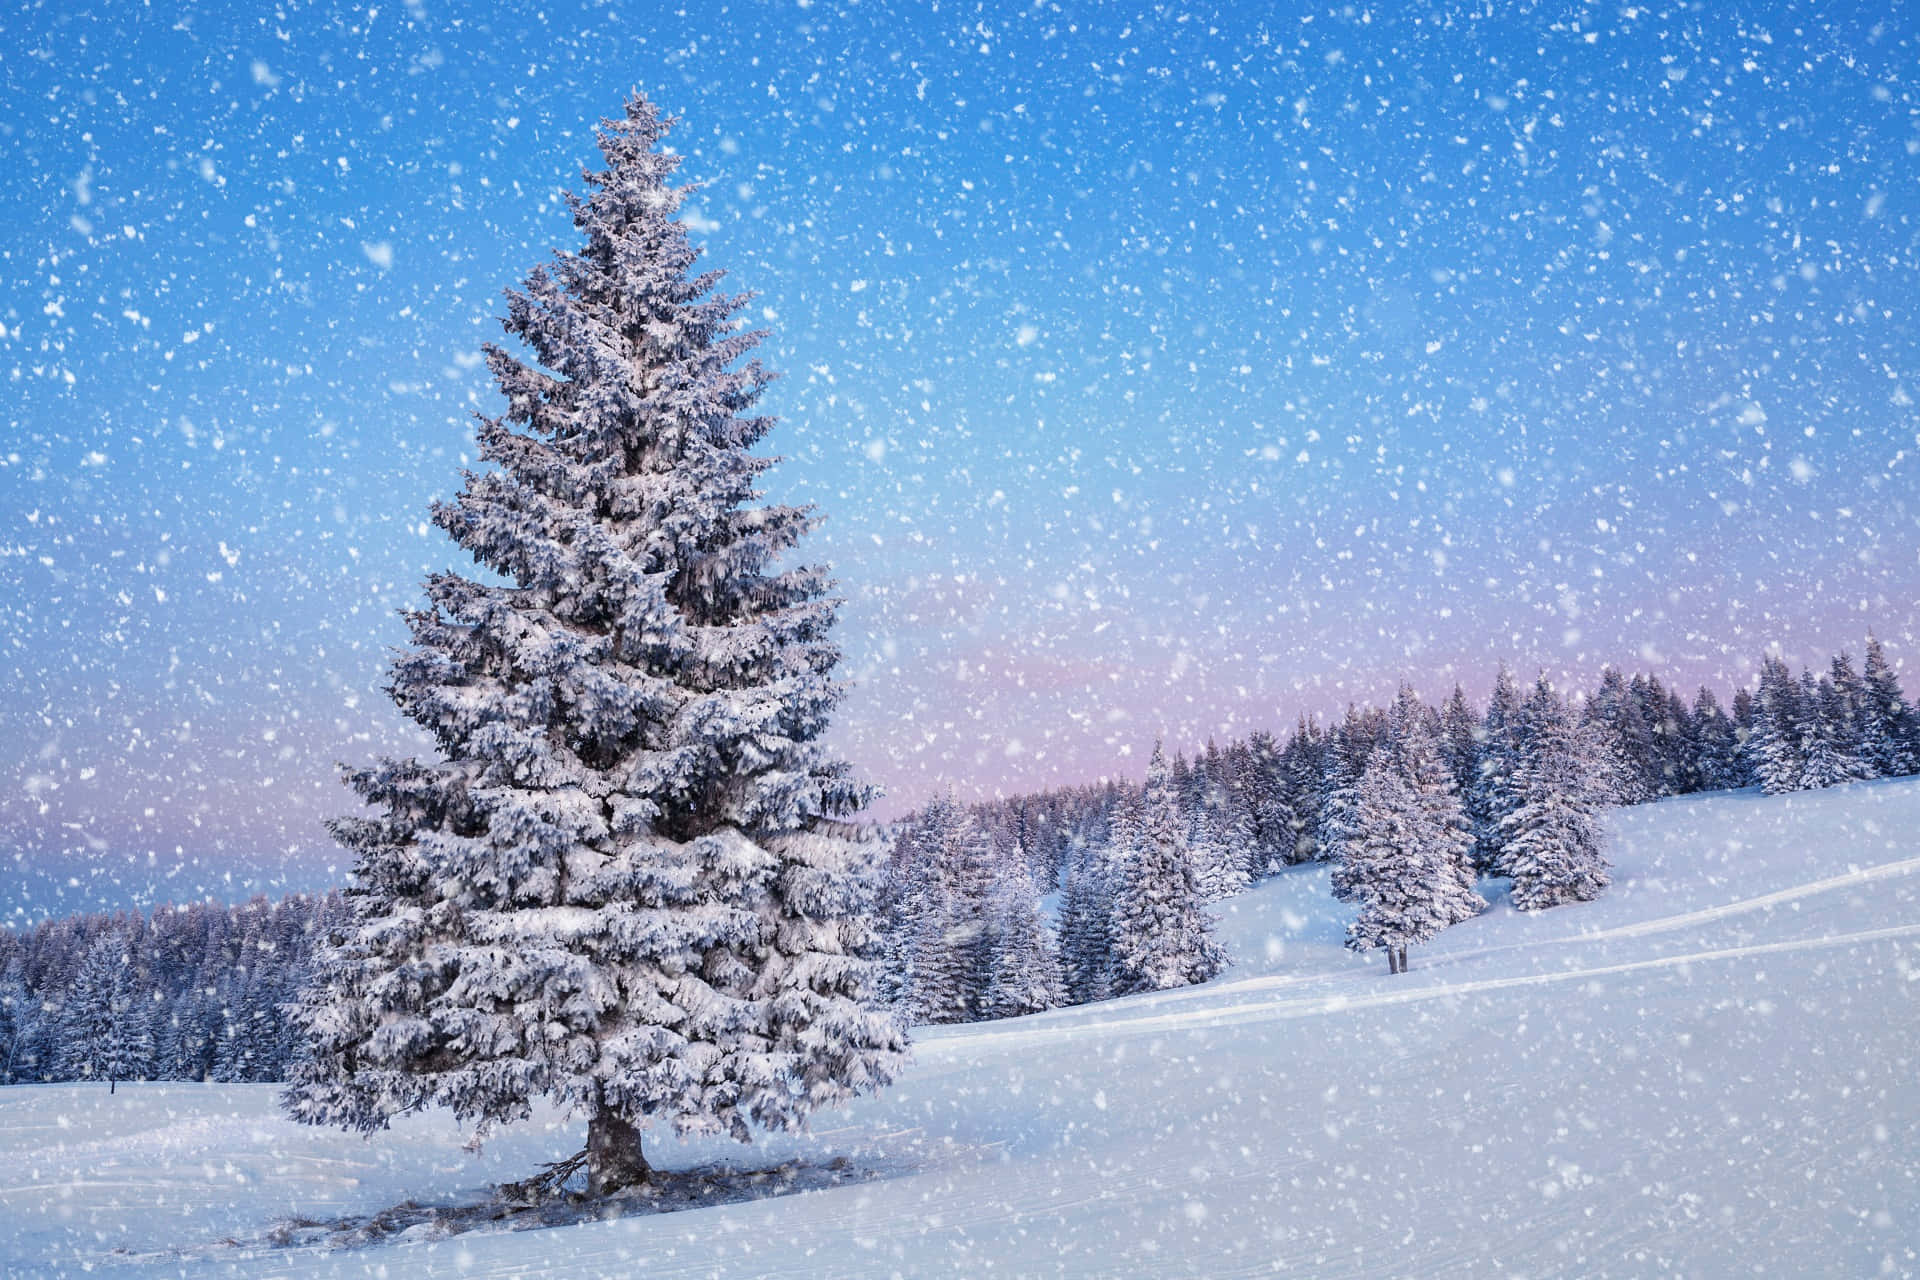 Enjoy The Beauty Of Winter With Tranquil Snow Falling.